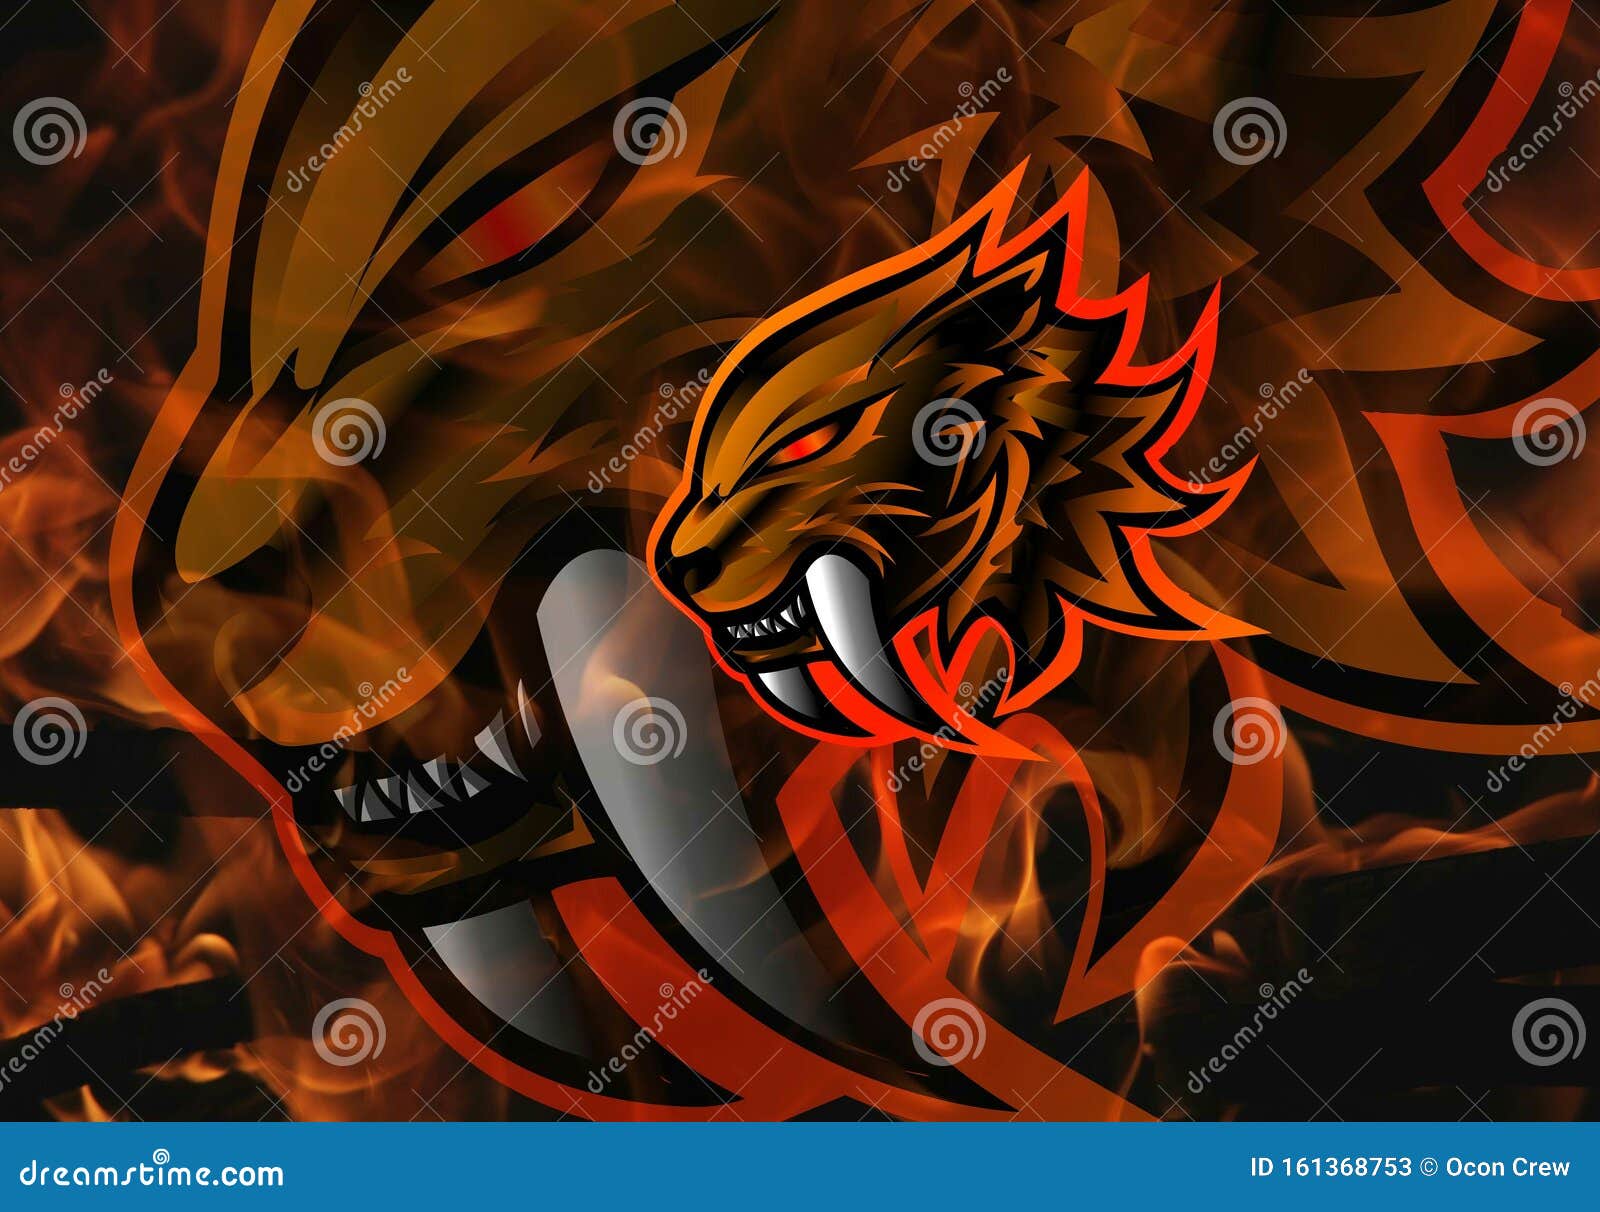 Sabertooth Mascot Logo Icon Illustration , Fire Background , Animal Print ,  Red Flame, Wallpaper Stock Illustration - Illustration of mascot,  background: 161368753